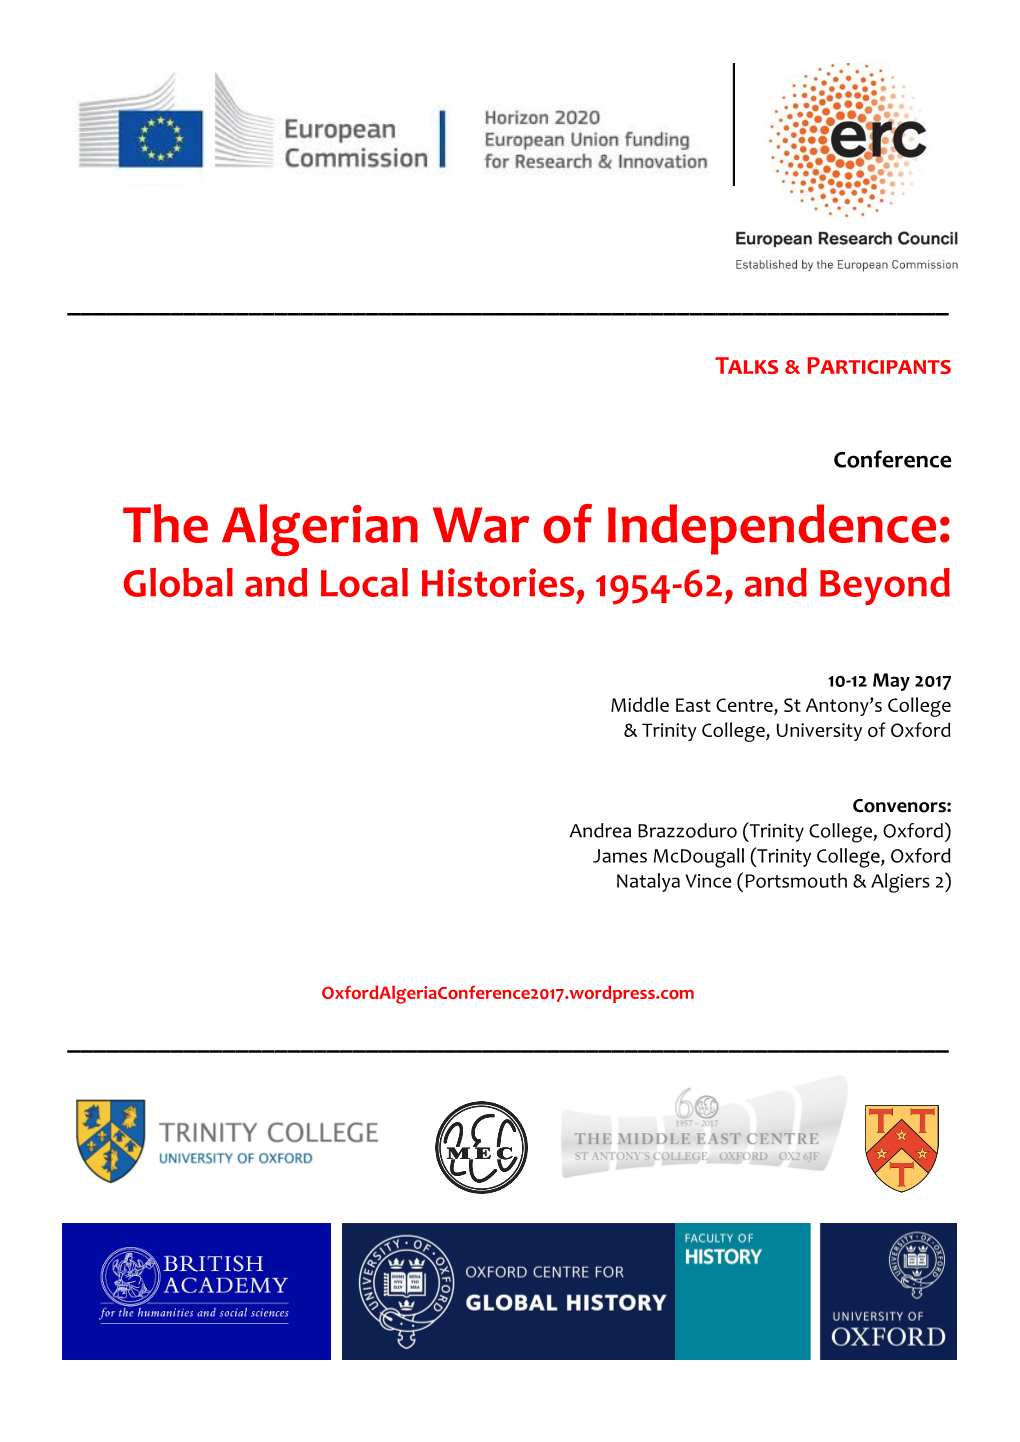 The Algerian War of Independence: Global and Local Histories, 1954-62, and Beyond